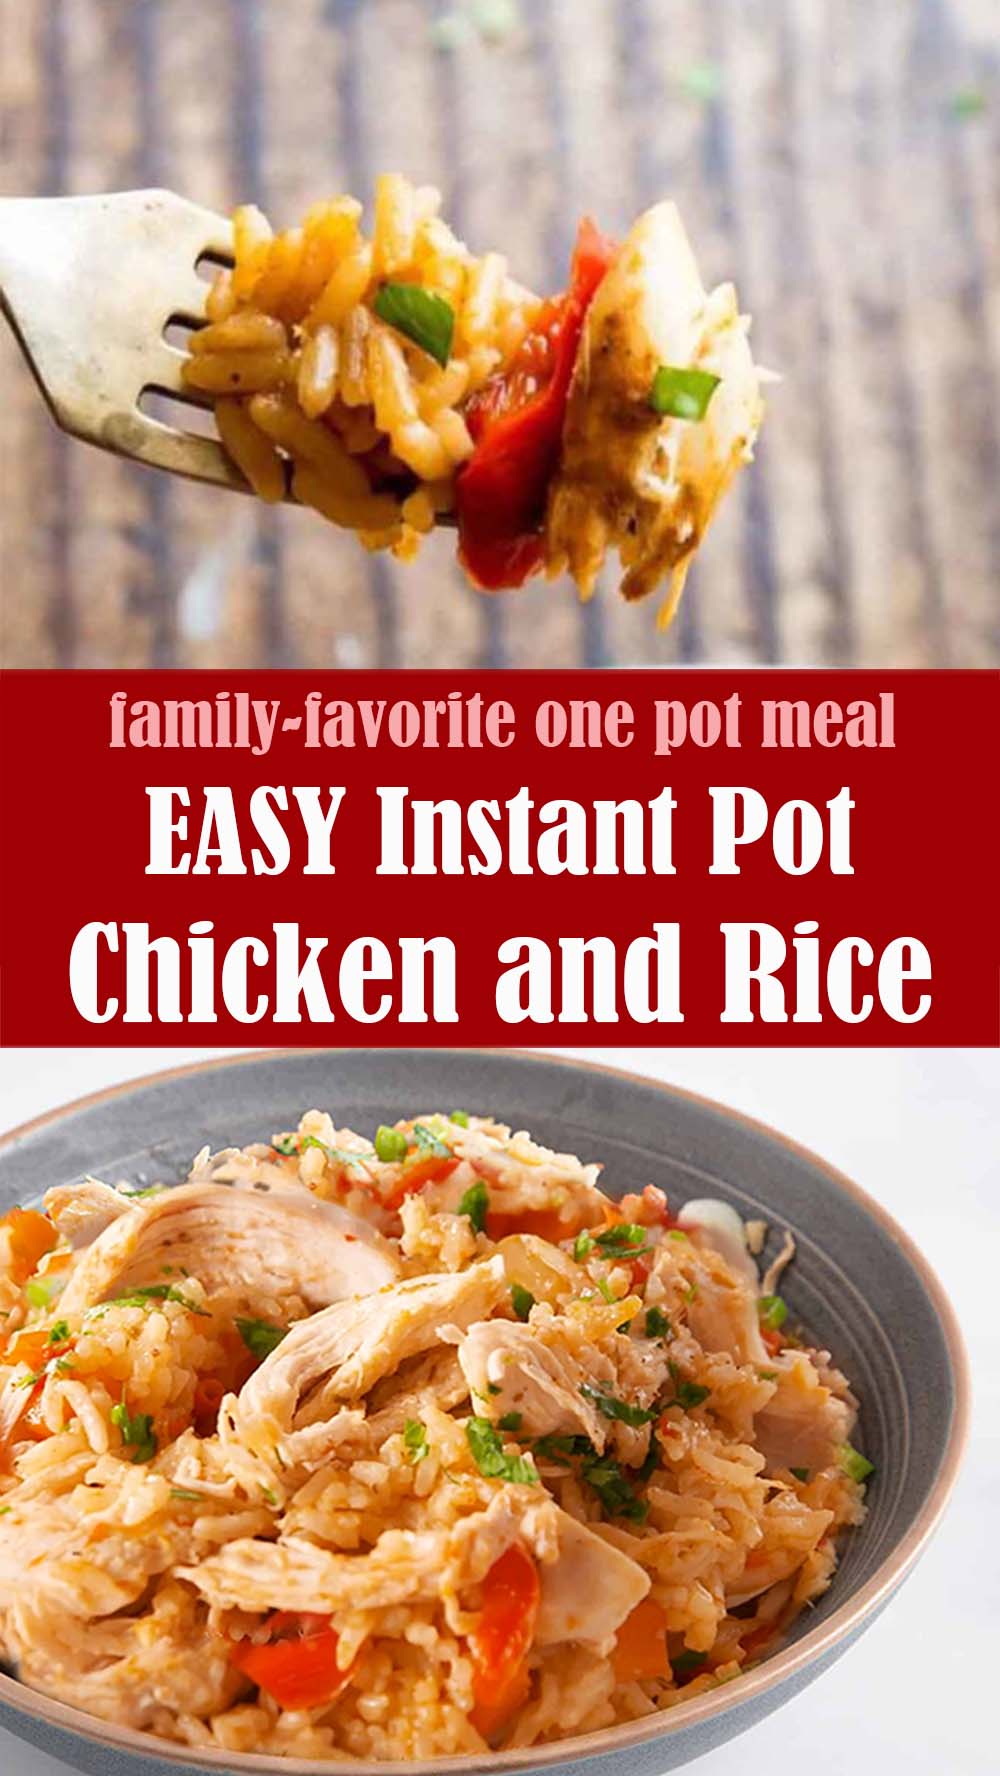 EASY Instant Pot Chicken and Rice